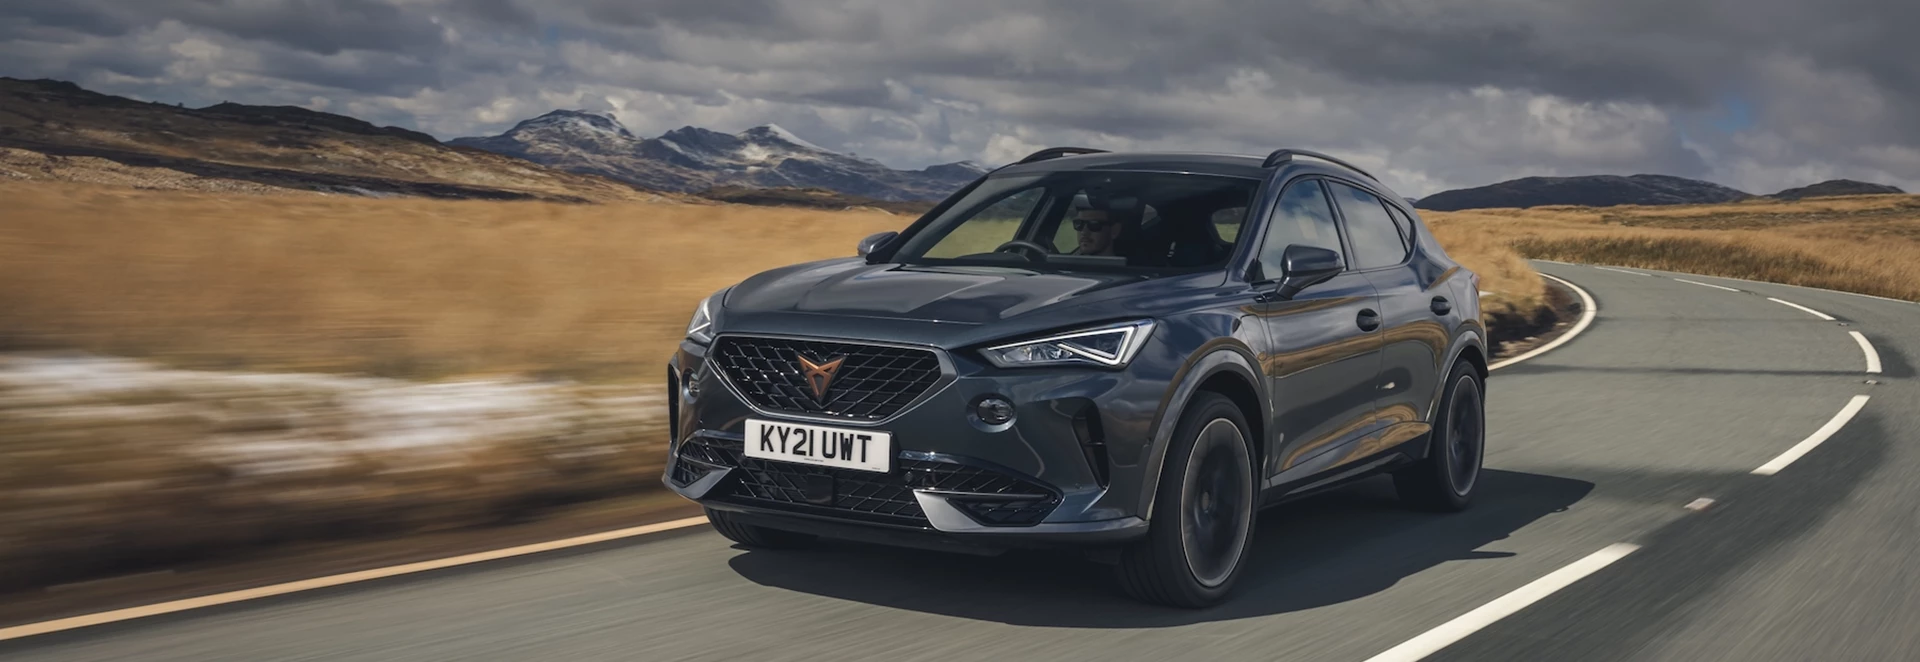 Cupra Formentor and Leon Estate ranges expanded with new derivatives 